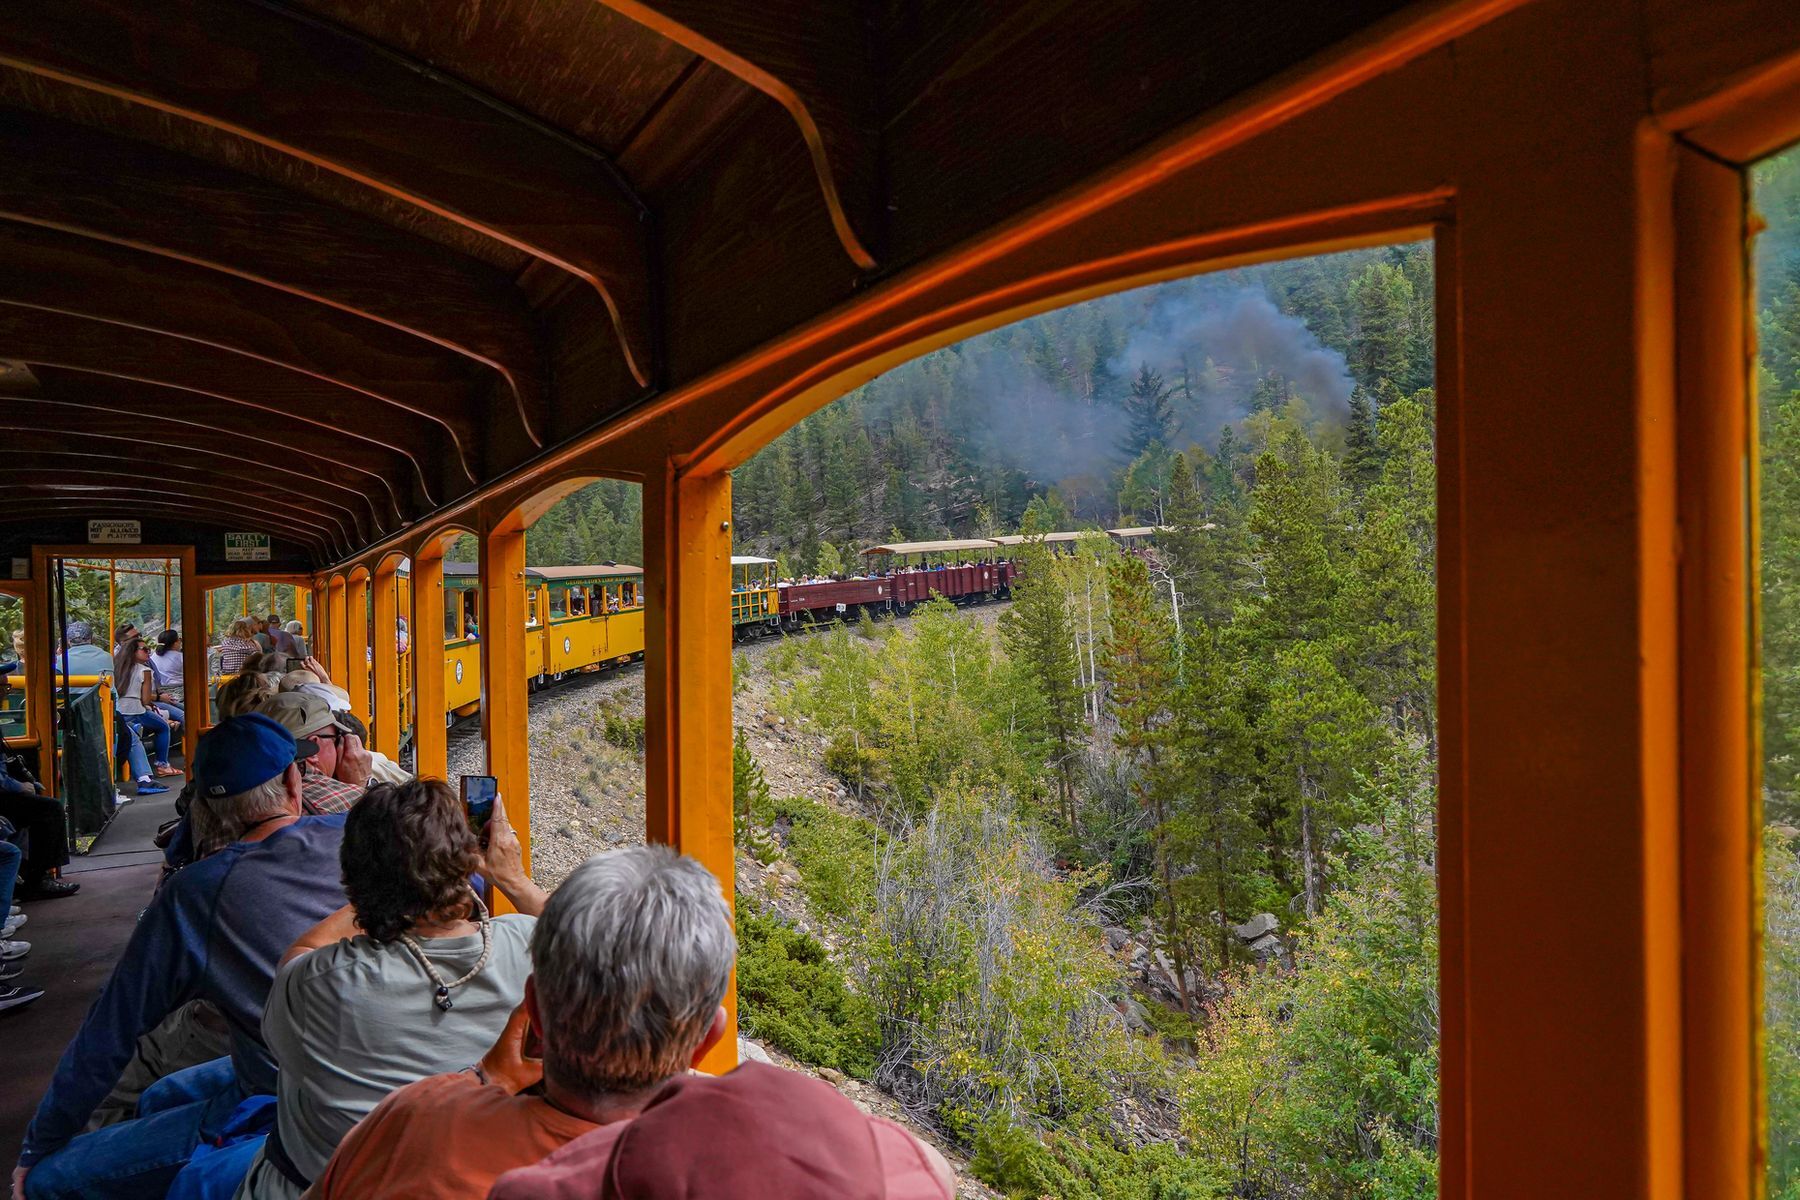 <p>Cruising through some of the country’s most dramatic landscapes and viewpoints, the <a href="https://www.rockymountaineer.com/">Rocky Mountaineer</a> train trip is on the bucket list of many travellers. With short trips costing over US$2,000 per person, this is definitely <a href="https://www.rockymountaineer.com/train-routes/2-day-rail-vancouver-banff-2023">a luxury travel option</a>. While some may deem it worthwhile, those looking for a budget-friendly ride might consider the soaring price tag a “tourist trap.” A more cost-effective option through the Rockies would be with the country’s local VIA Rail line, which will get you there for a fraction of the cost. </p>